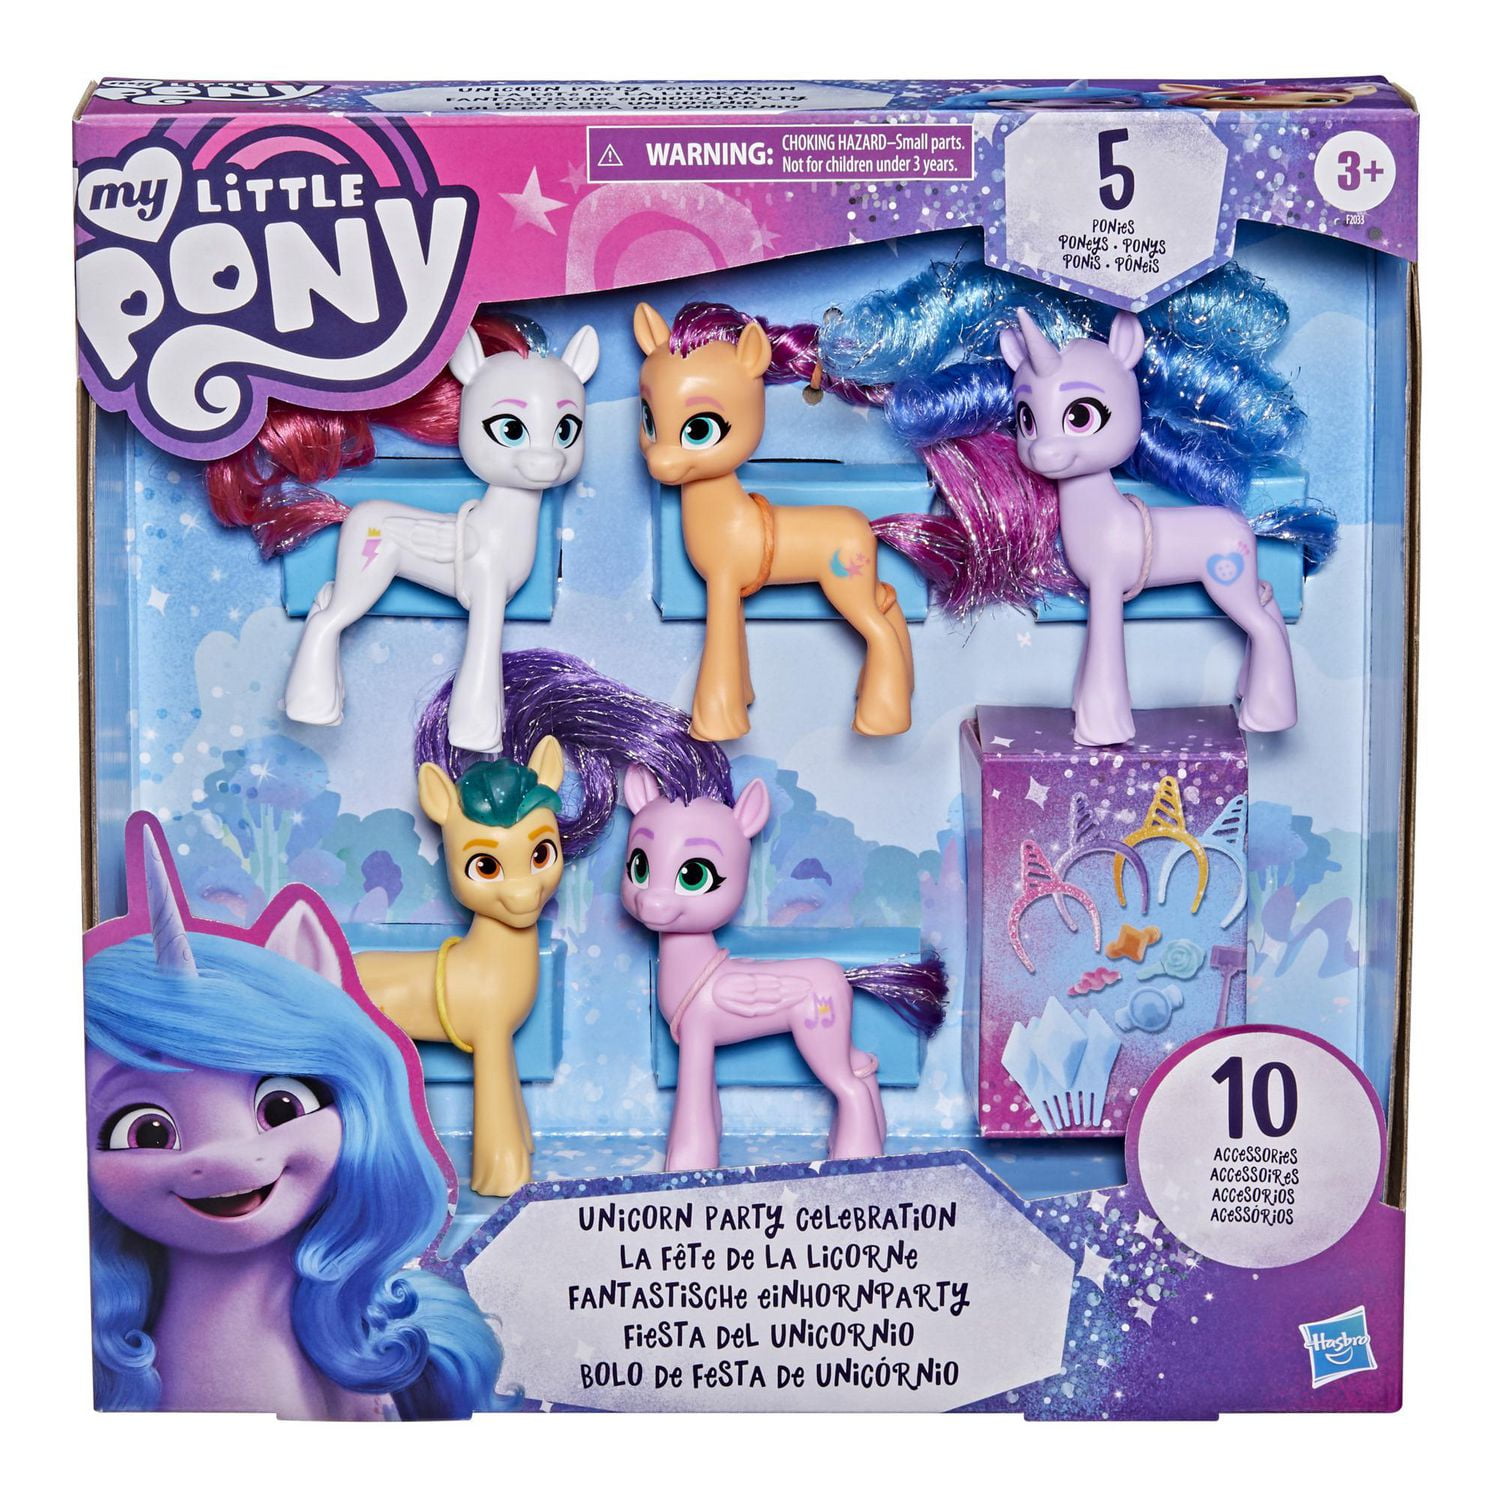 Buy My Little Pony Girls' Unicorn Underwear Pack of 5 Size 5 Multicolored  at